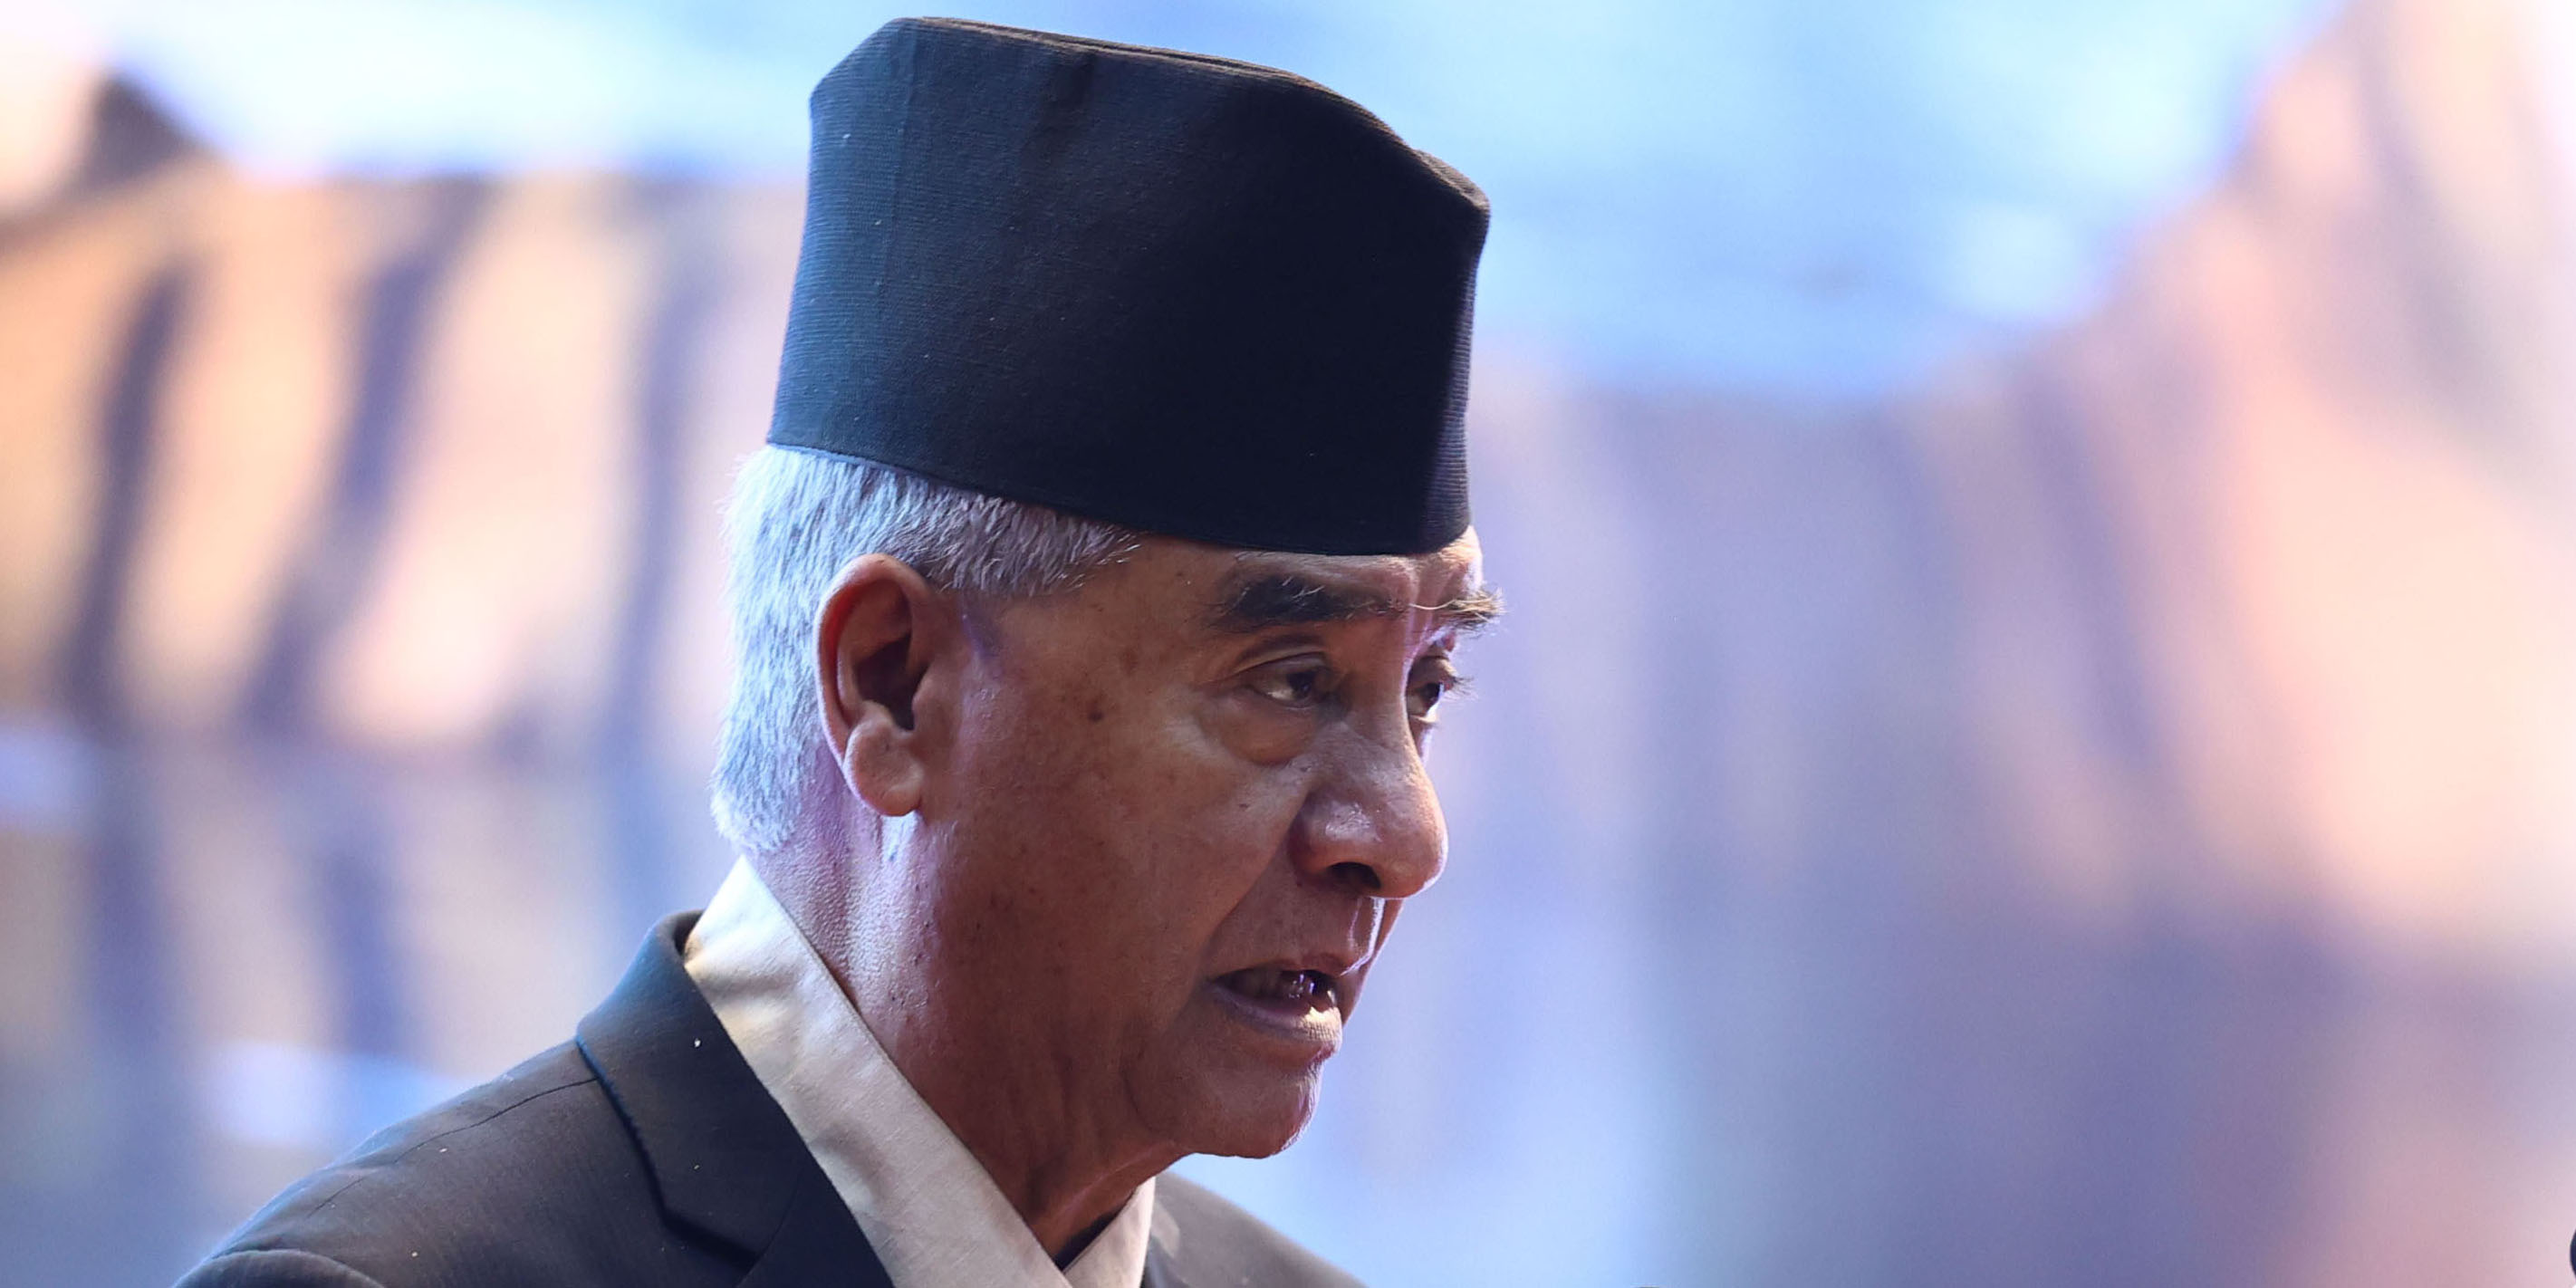 Khand won’t face conviction based on allegations alone, says Deuba